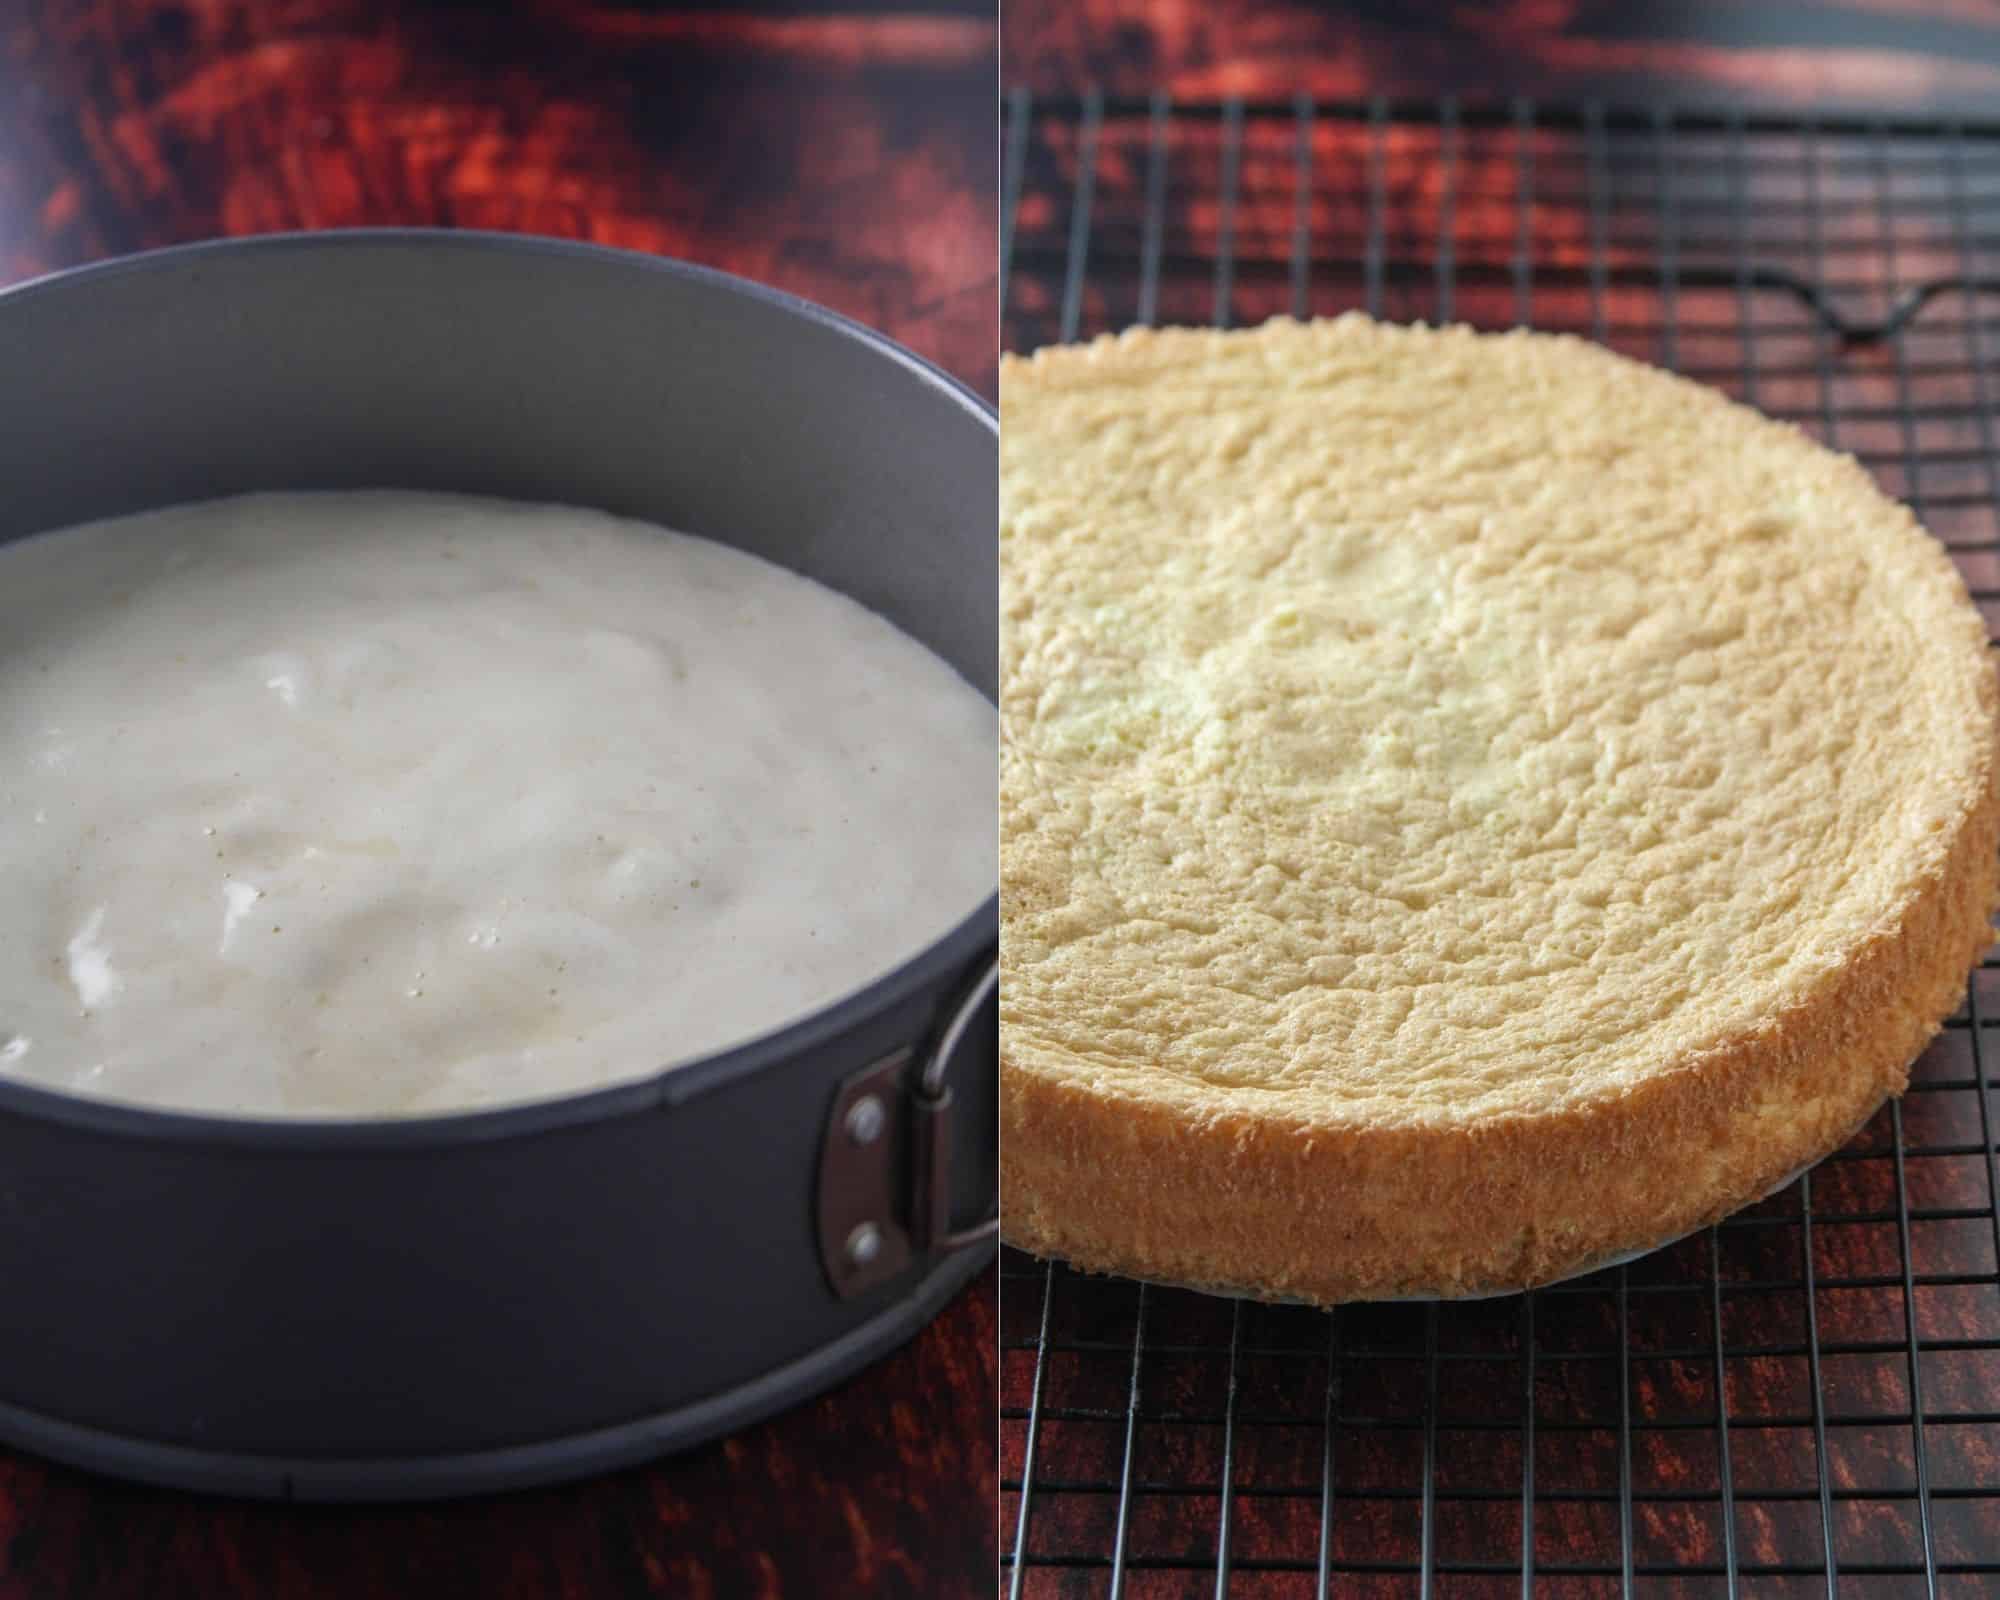 A collage showing the sponge cake batter on the left, and the baked sponge cake on the right.